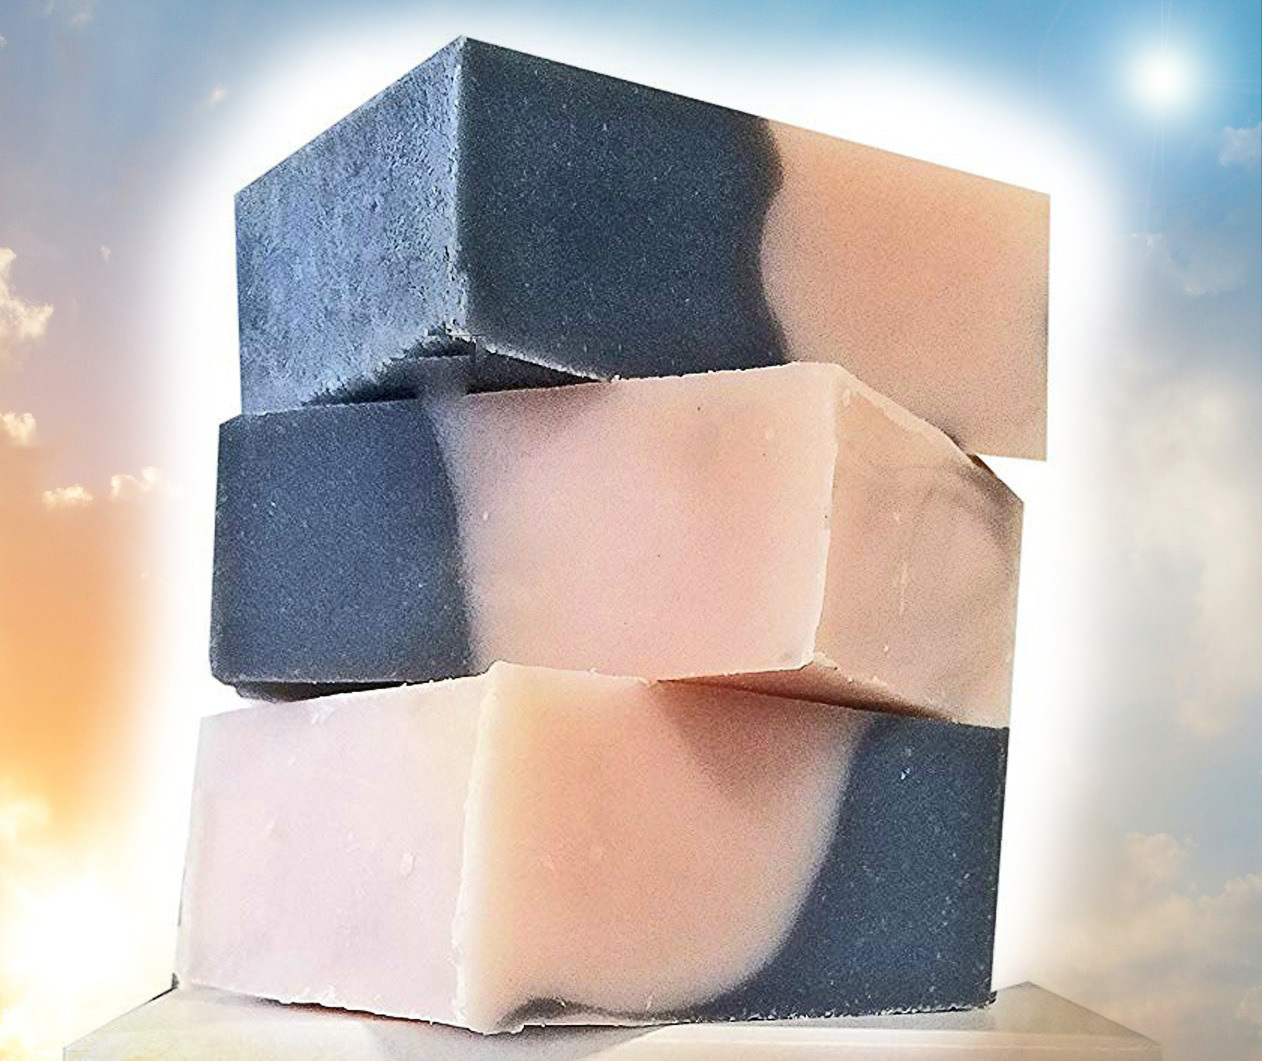 Primary image for FREE SEPT 2 ONLY W $49 Haunted DETOX SOAP 27X HALT RID NEGATIVITY MAGICK Witch 